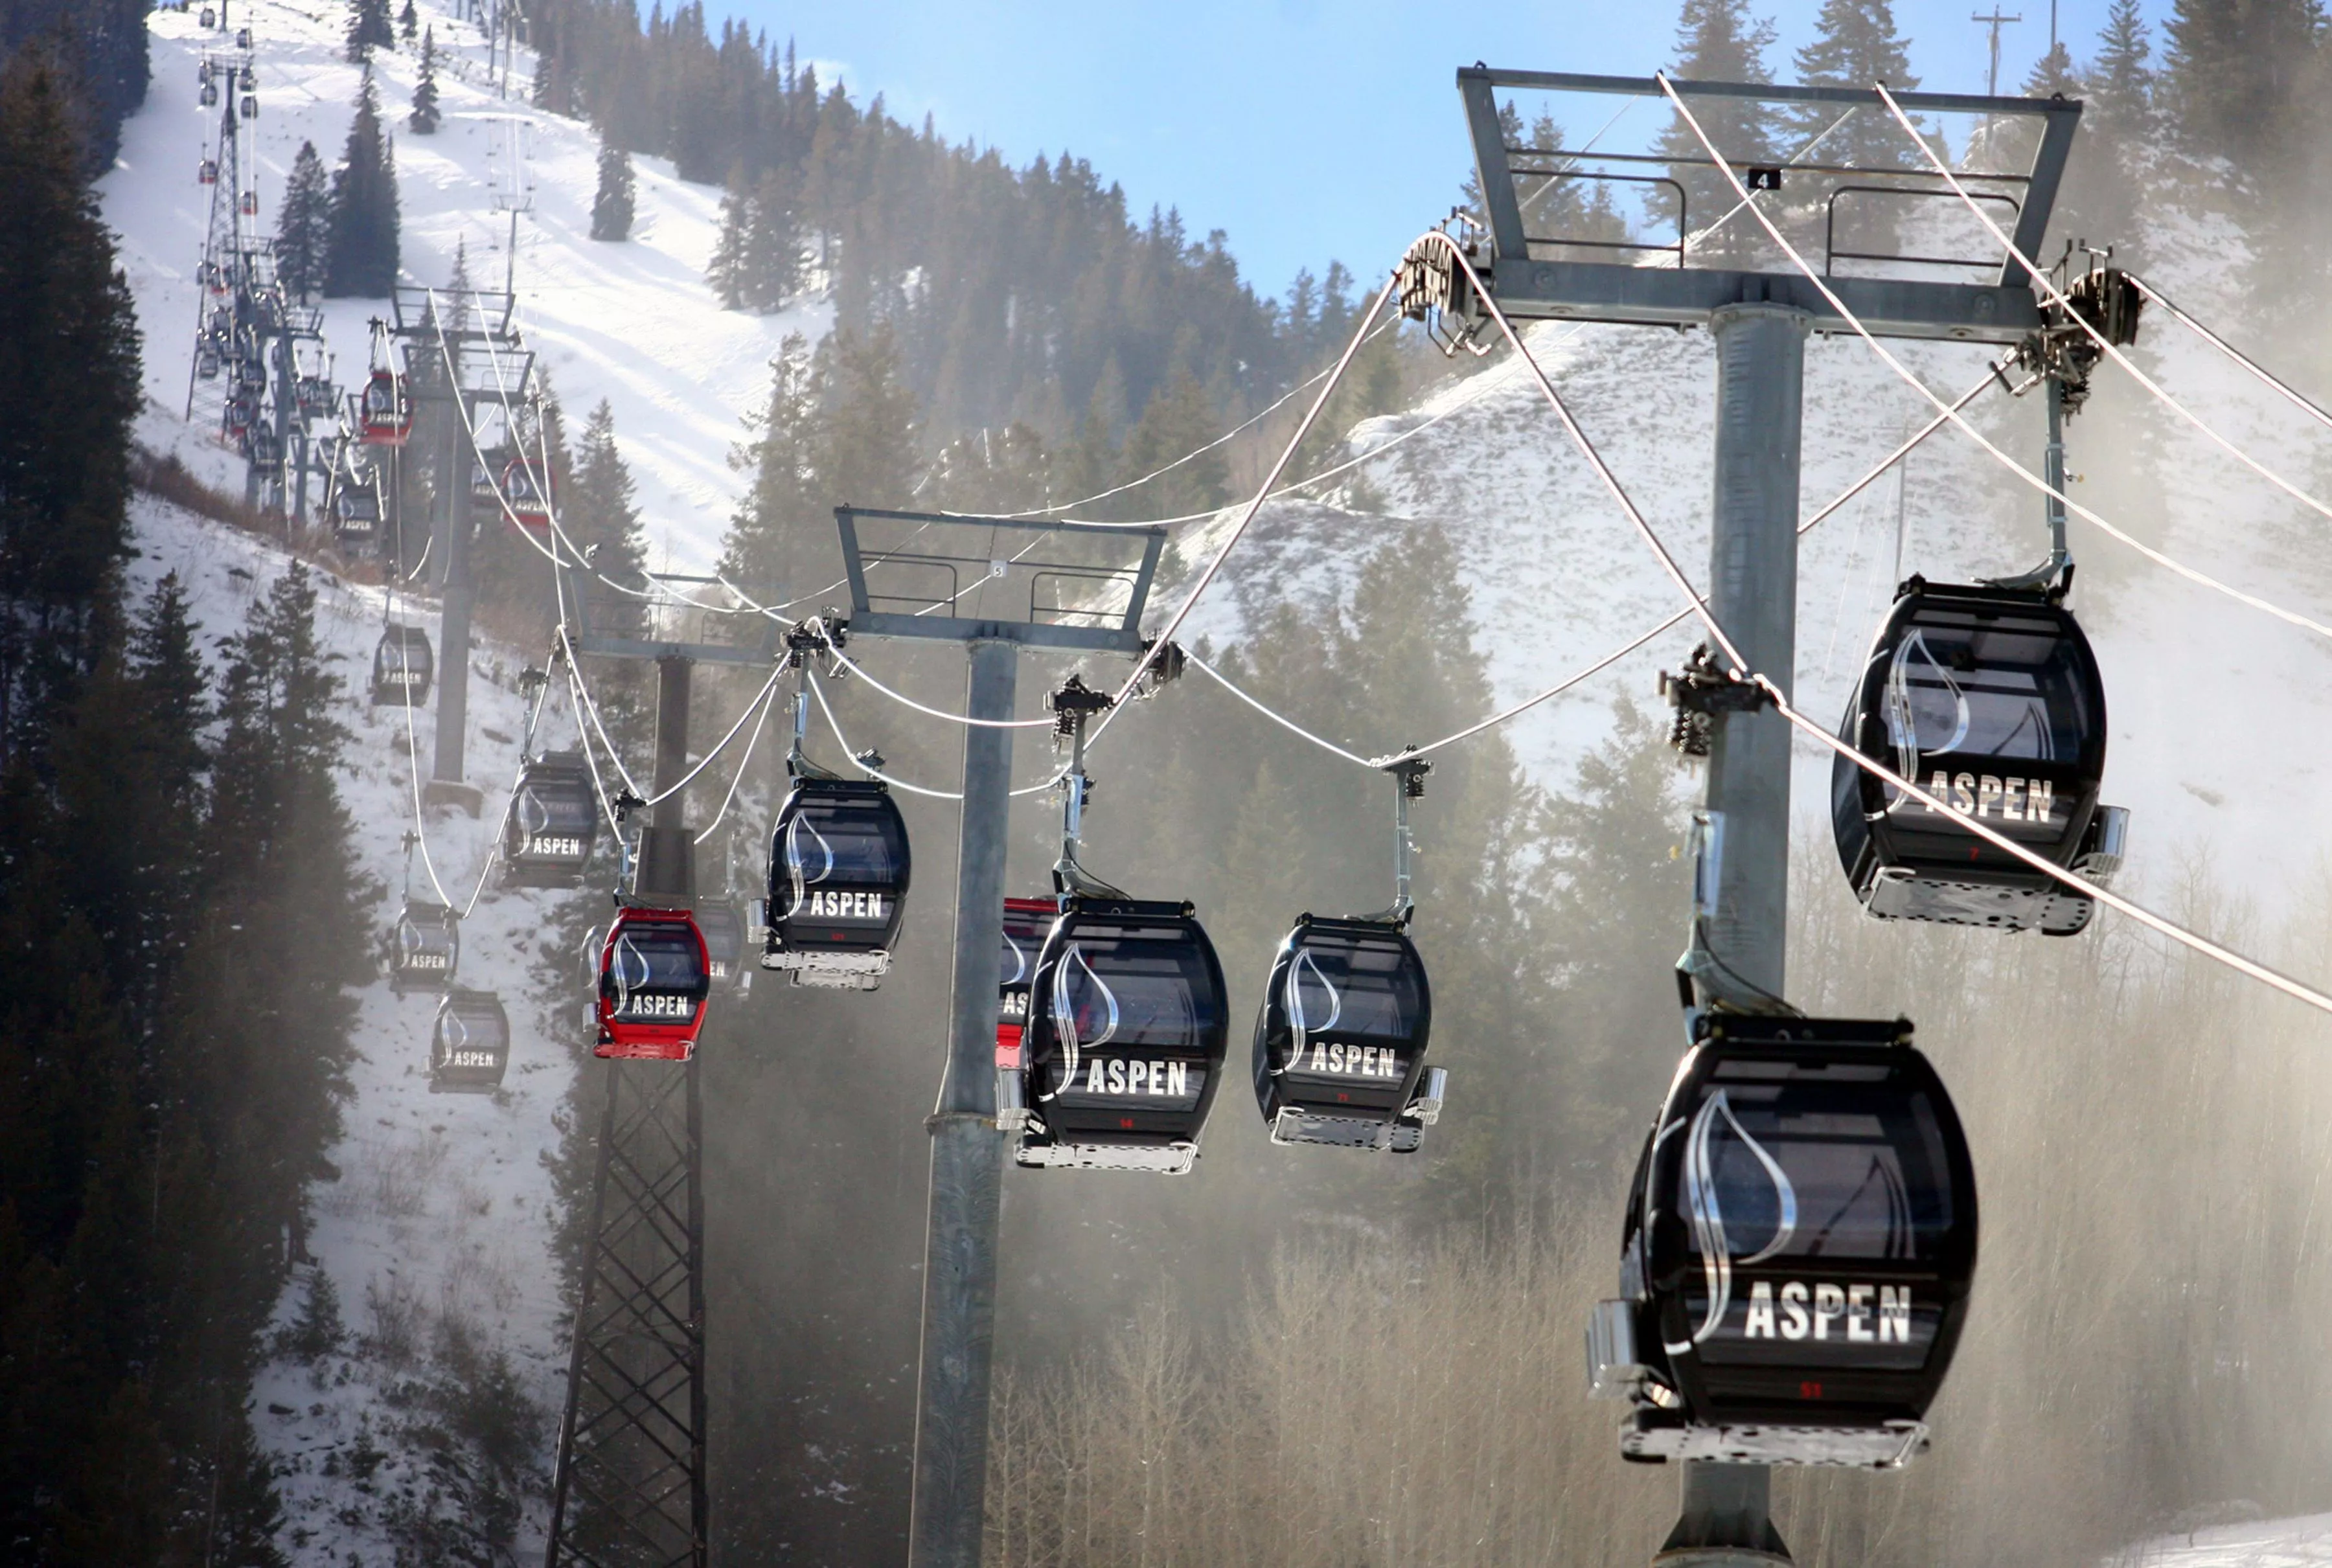 Silver Queen Gondola in USA, North America | Snowboarding,Mountaineering,Skiing - Rated 4.1